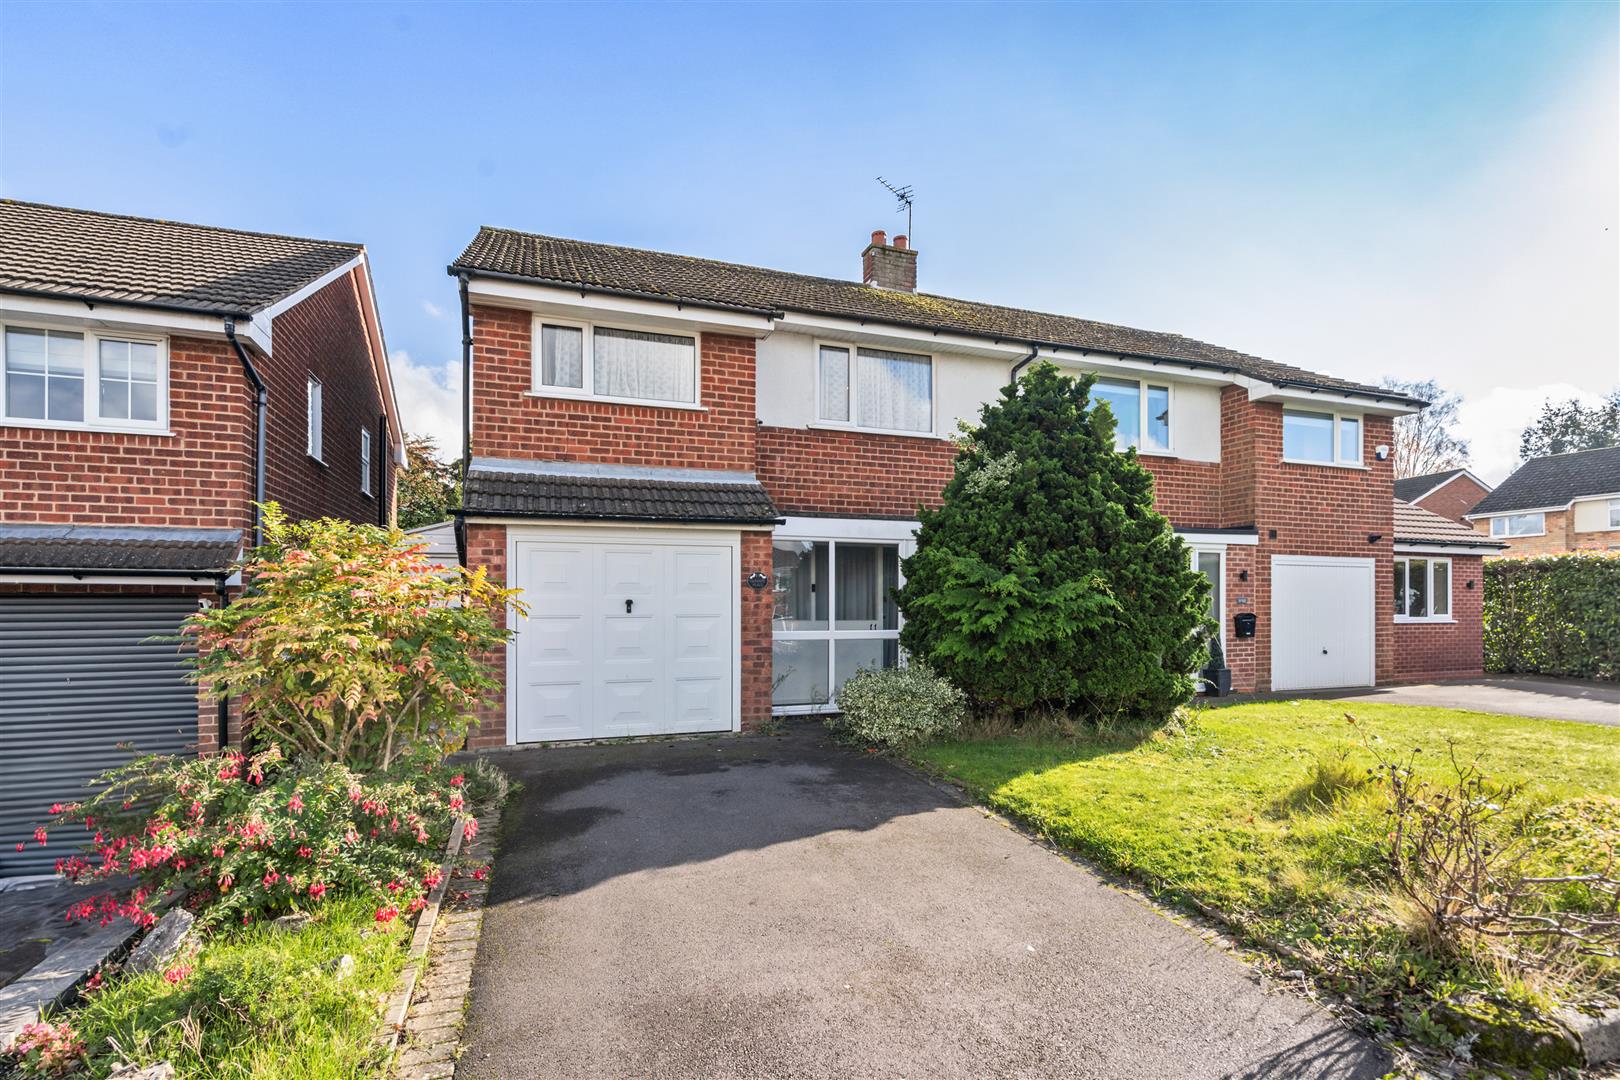 3 bed semi-detached house for sale in Whateley Hall Close, Knowle  - Property Image 1